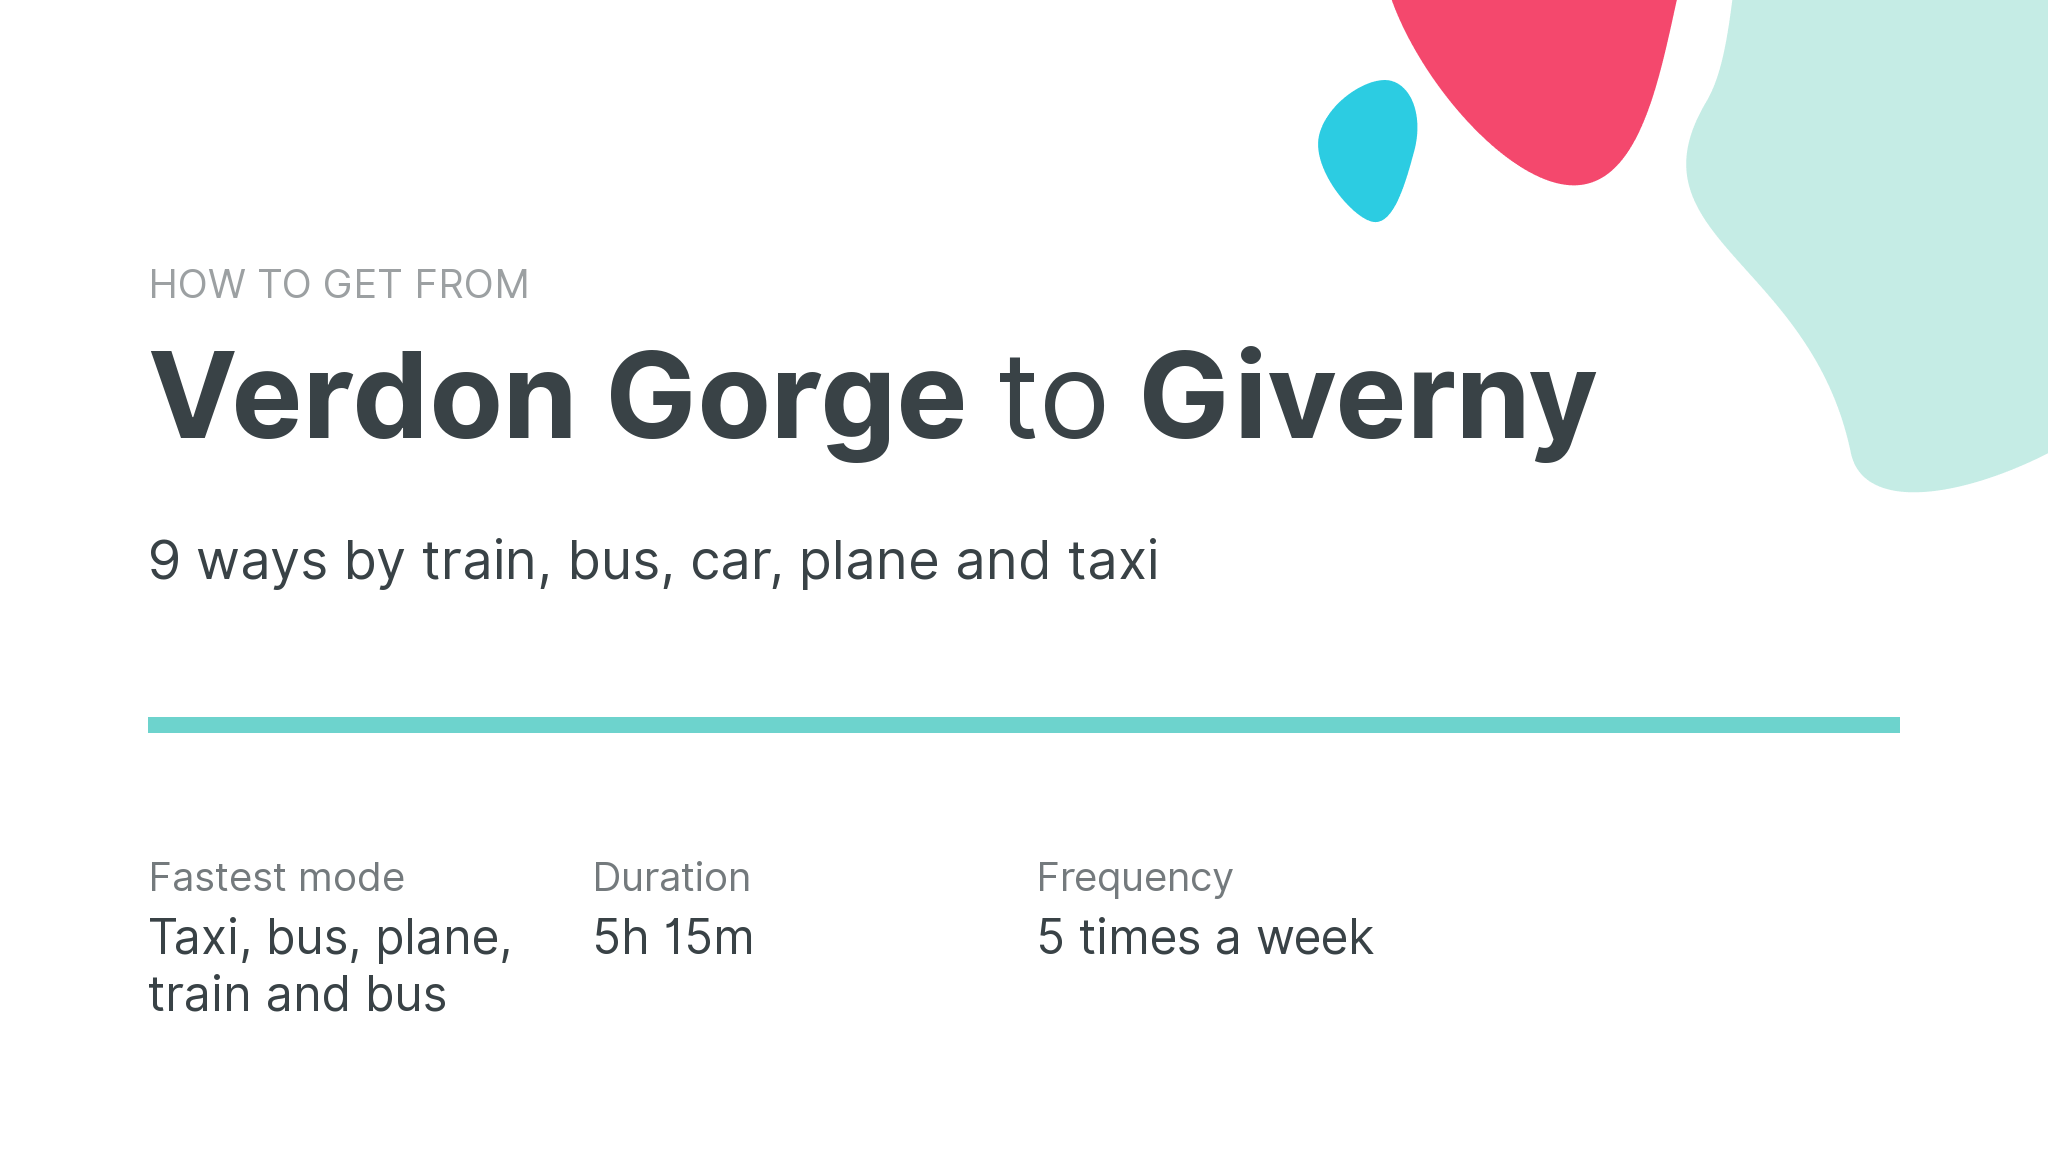 How do I get from Verdon Gorge to Giverny